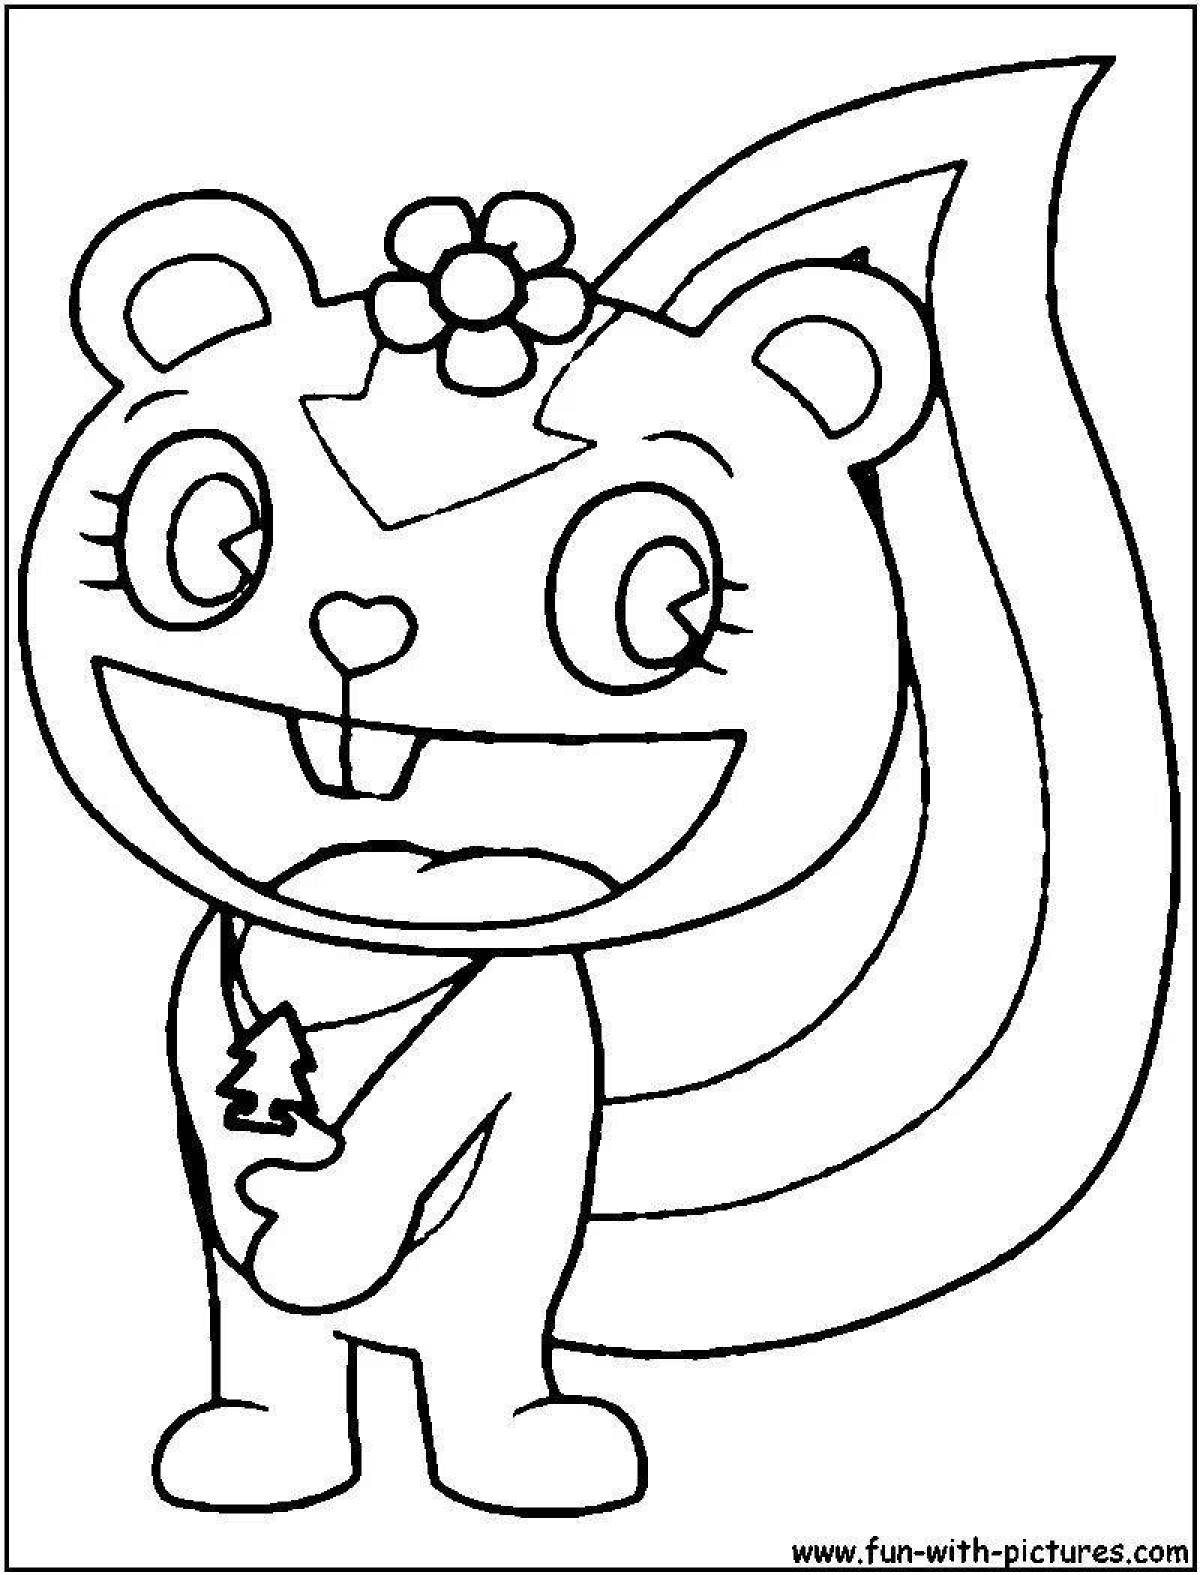 Flippy's charming coloring book